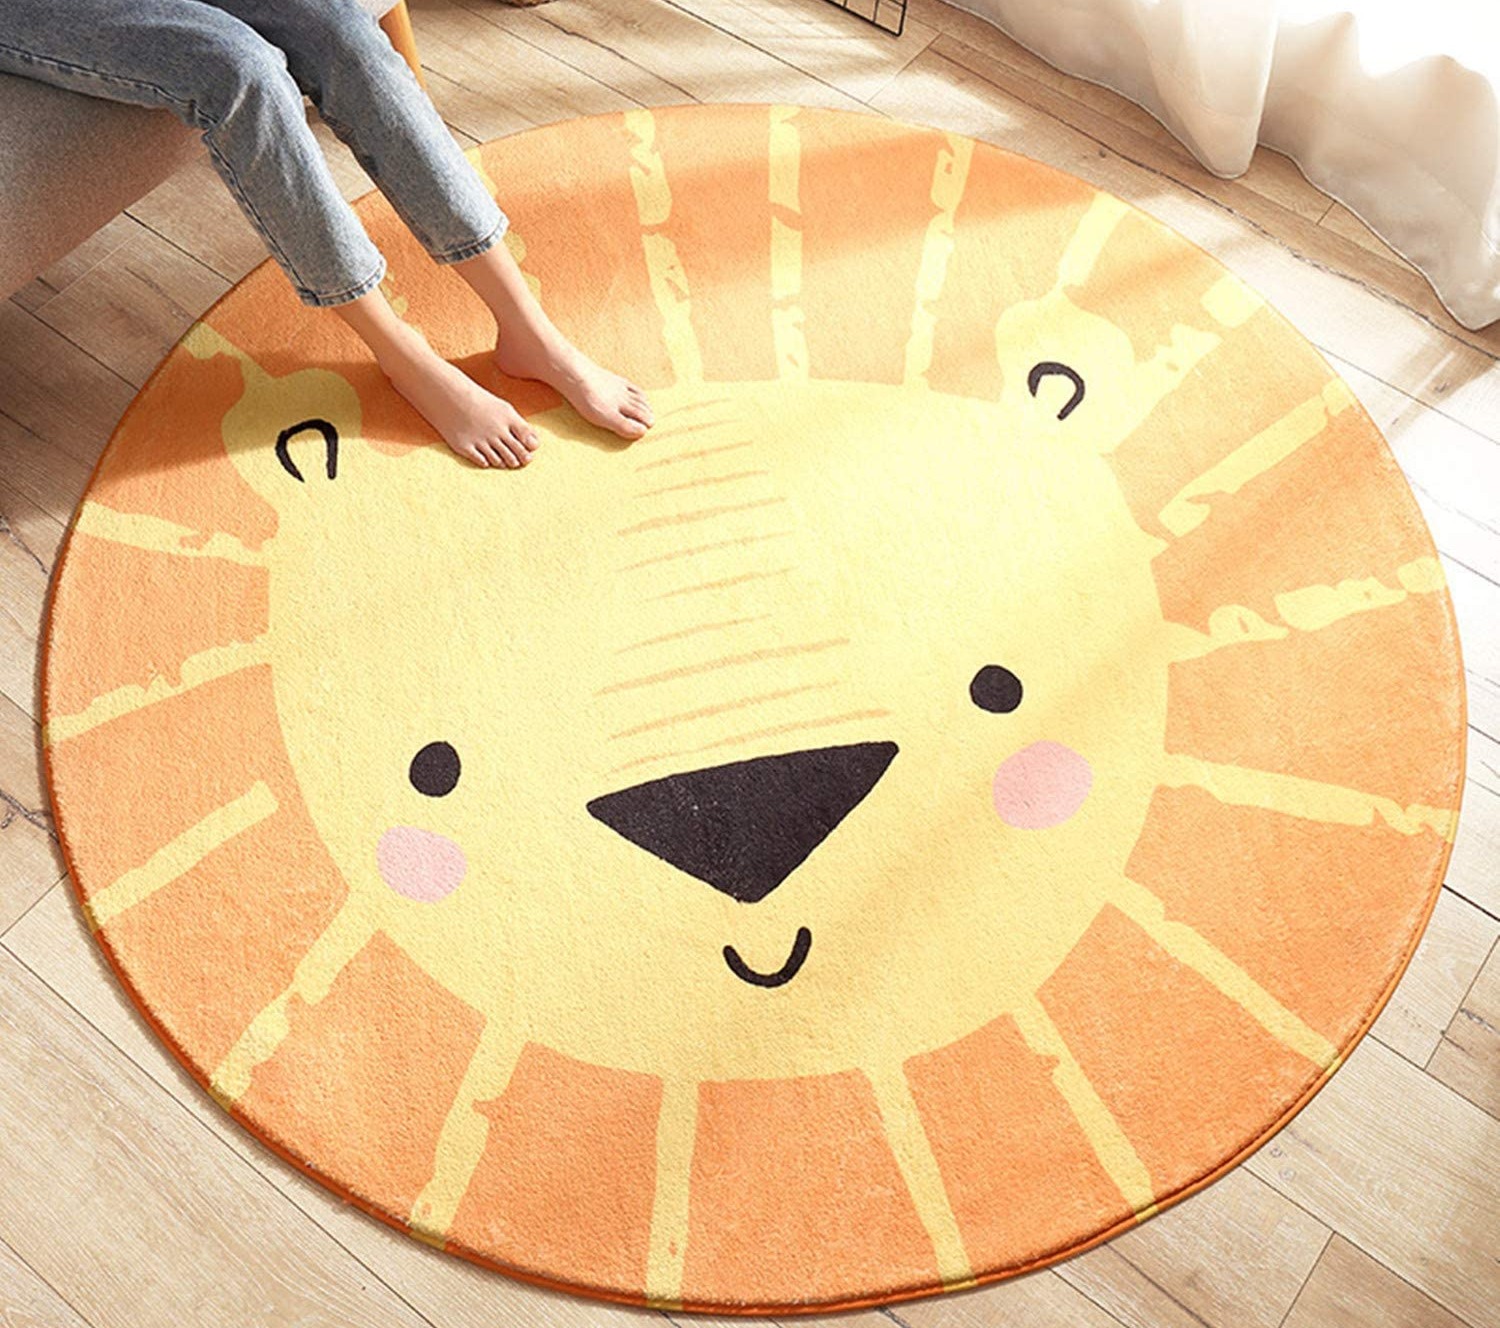 36.2 Inch Large Round Soft Area Rugs Gold Black Pineapple Nursery Playmat Rug Mat for Kids Playing Room Bedroom Living Room Home Decorative Rug 